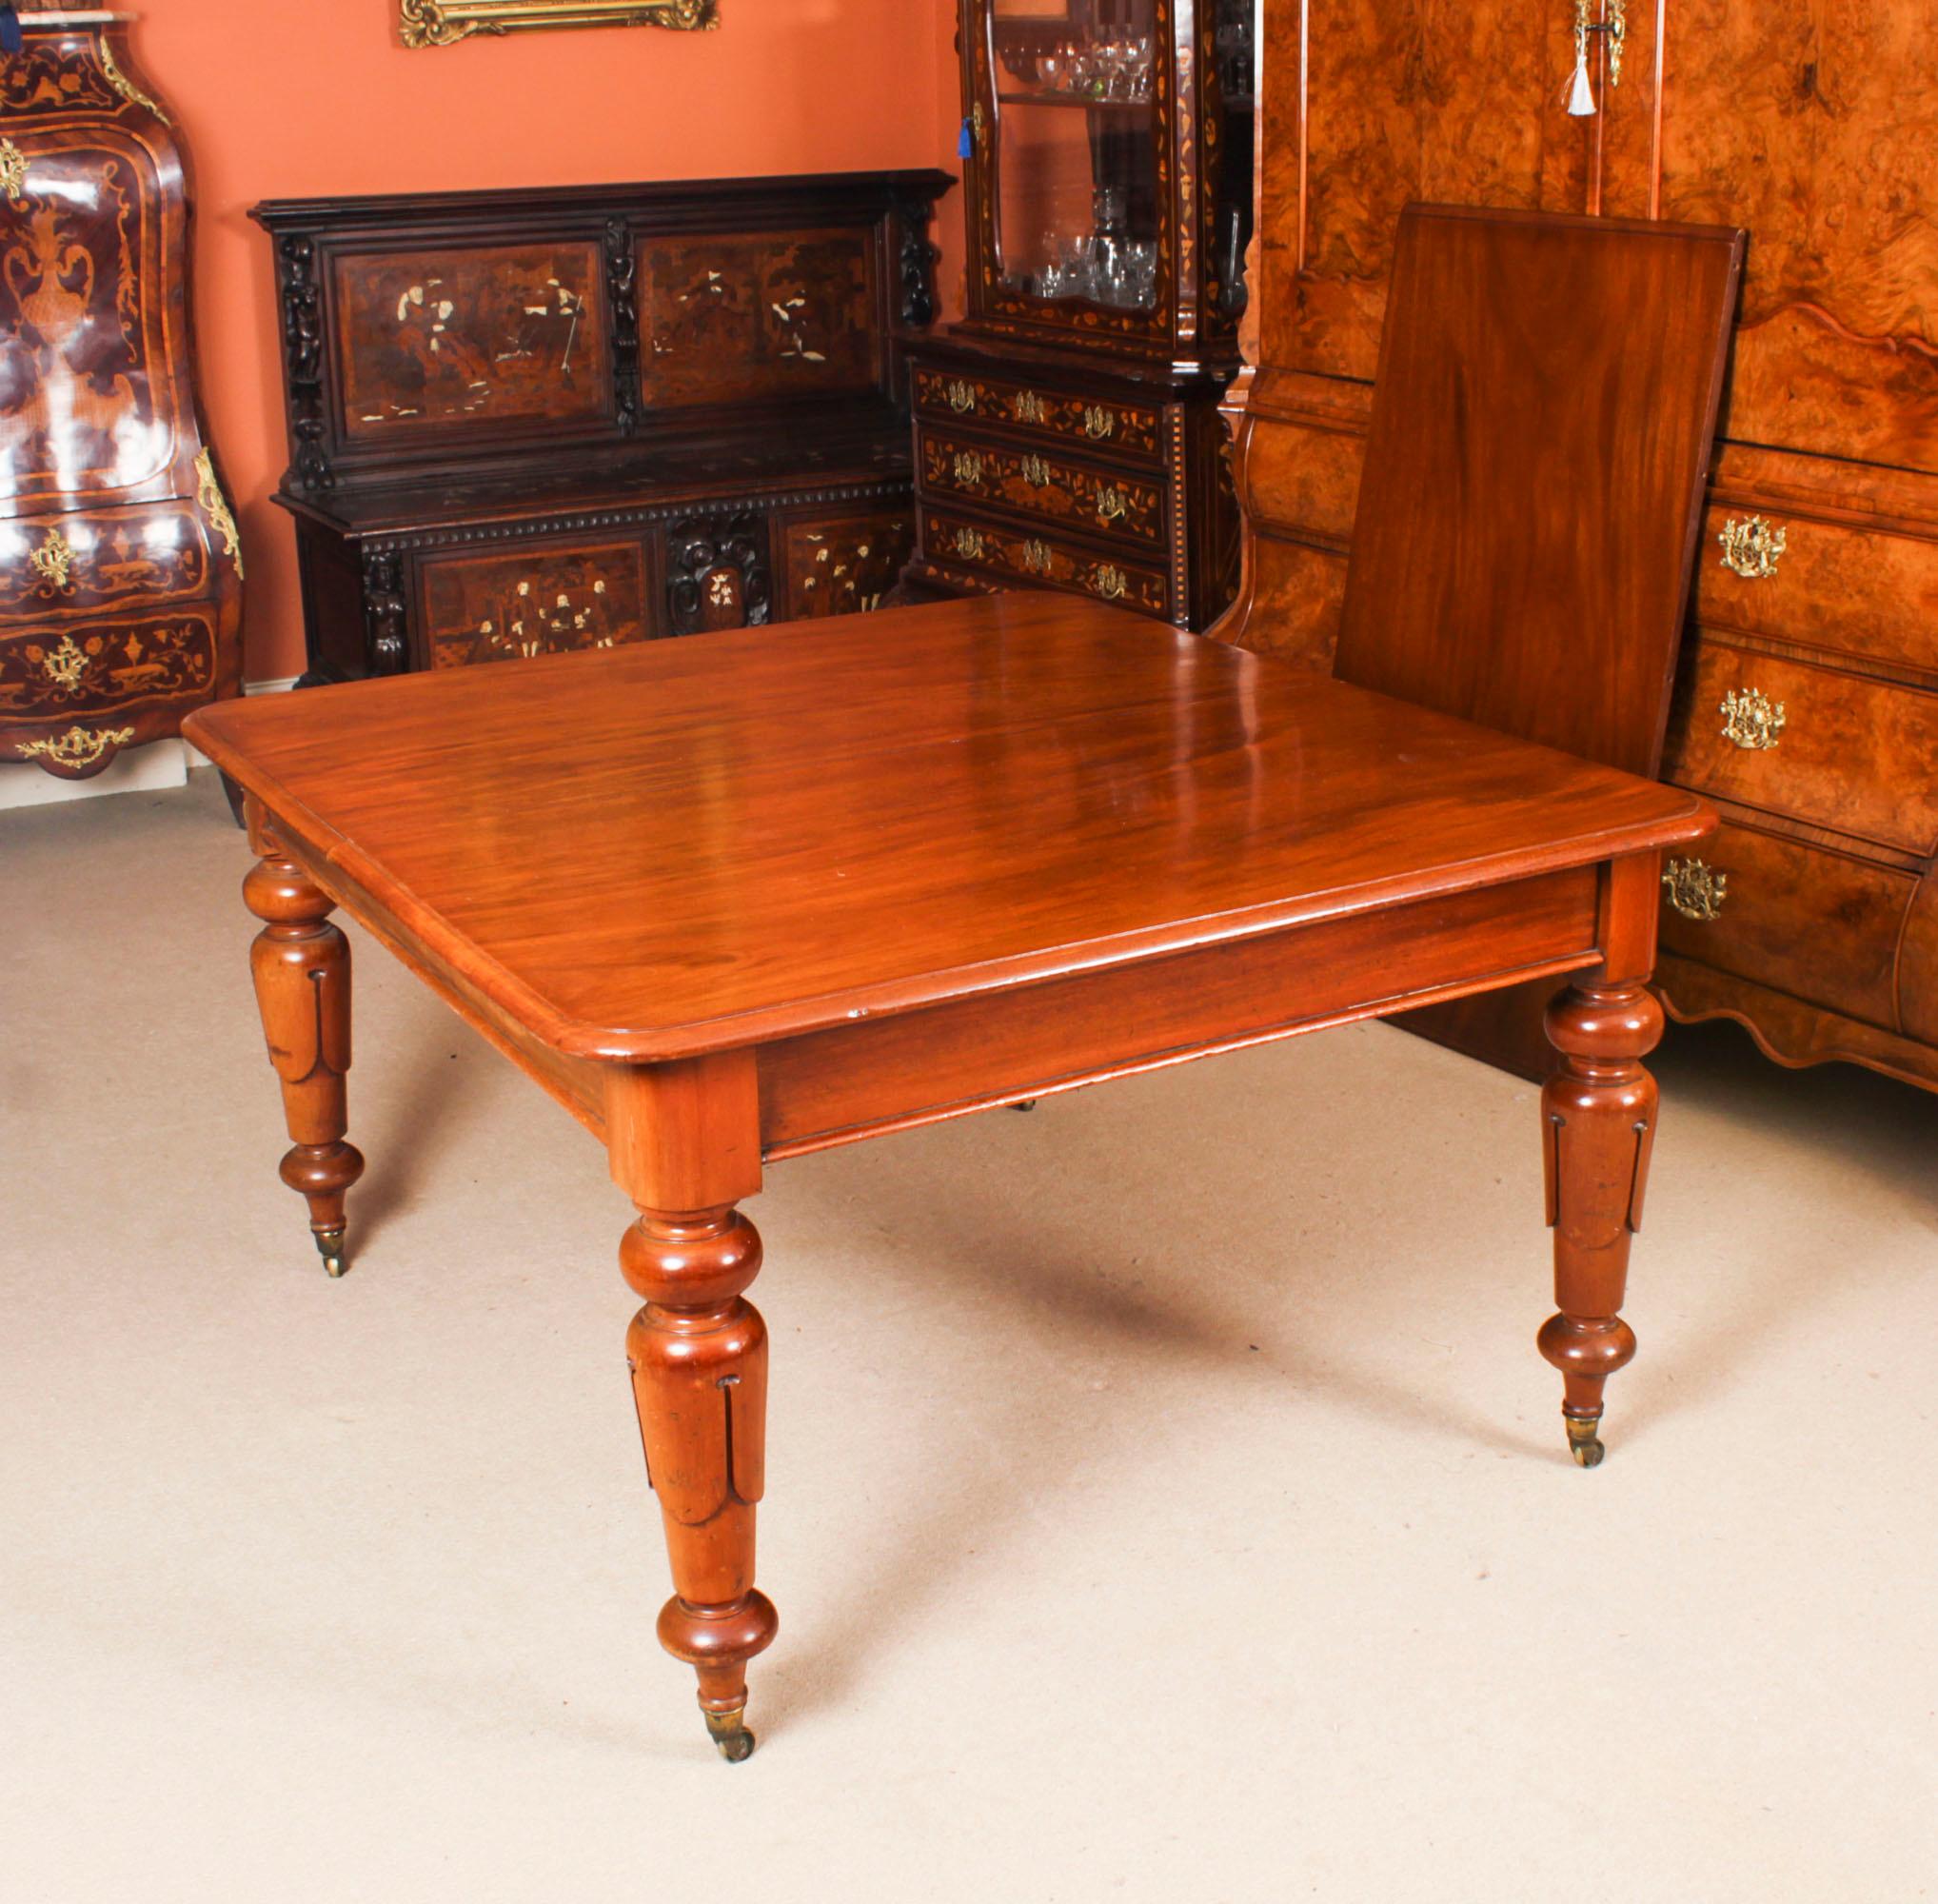 Antique William IV Flame Mahogany Extending Dining Table 19th Century 5